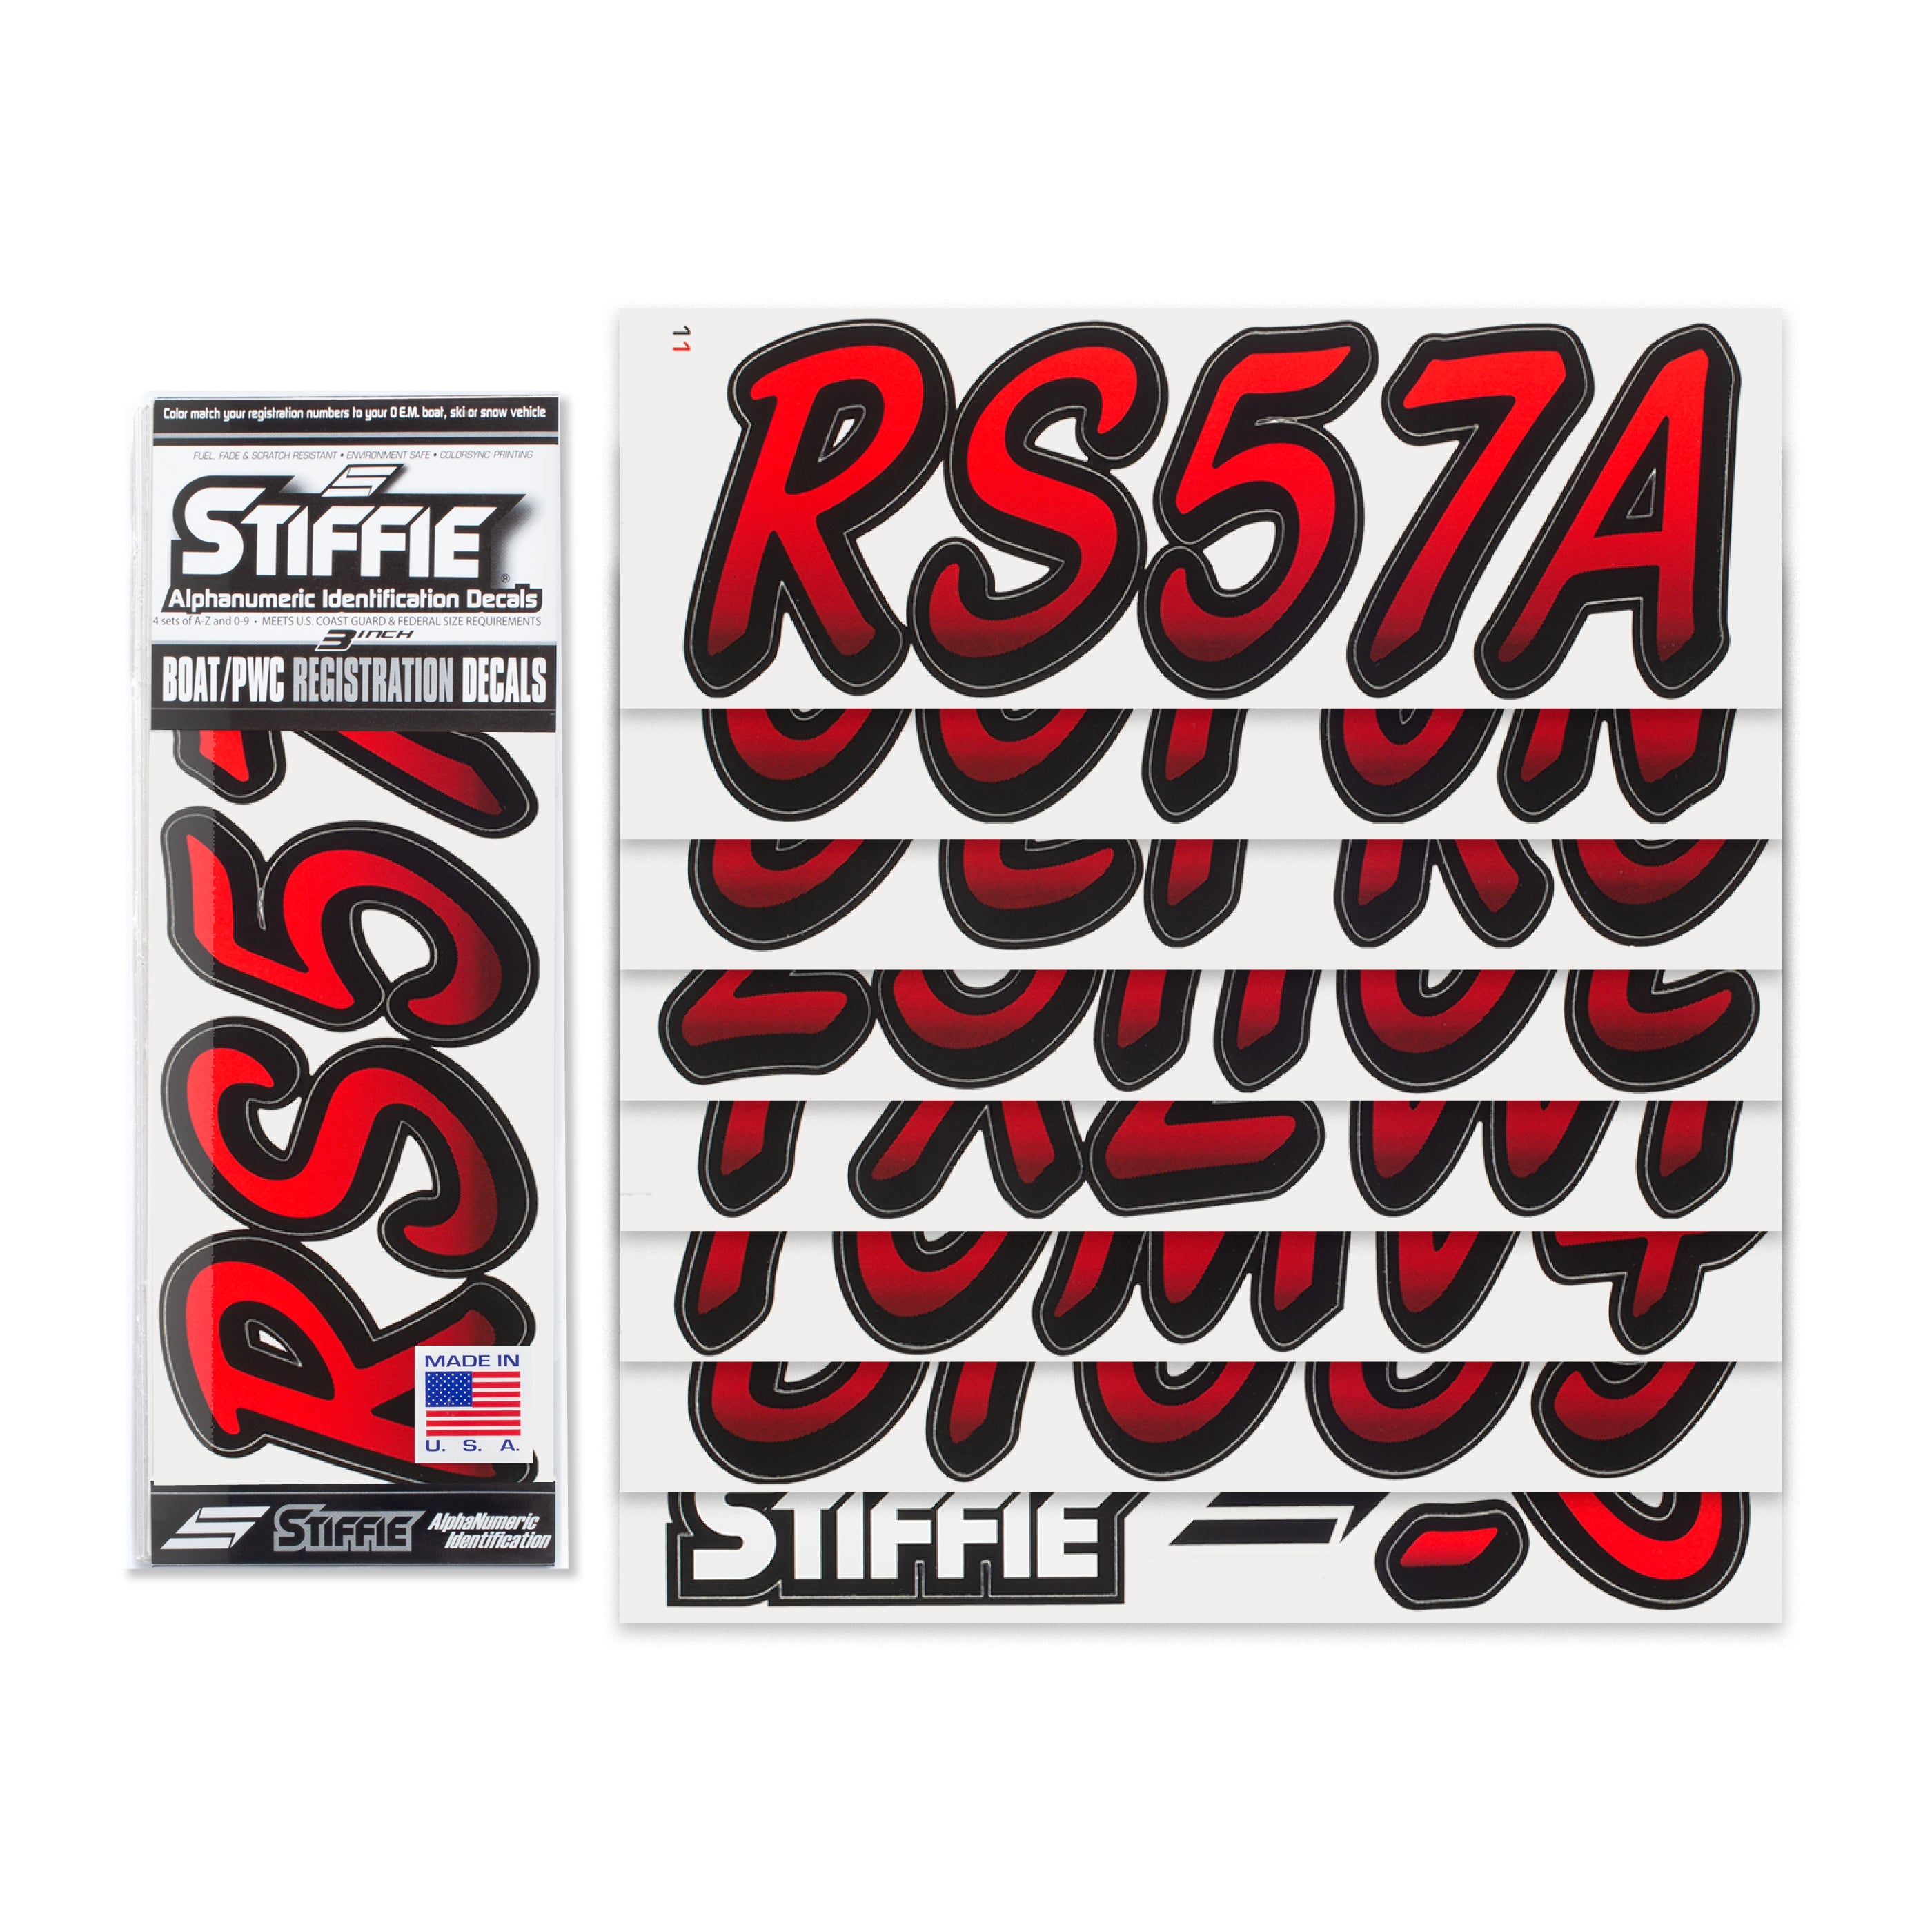 Stiffie Whipline Red/Black 3" Alpha-Numeric Registration Identification Numbers Stickers Decals for Boats & Personal Watercraft